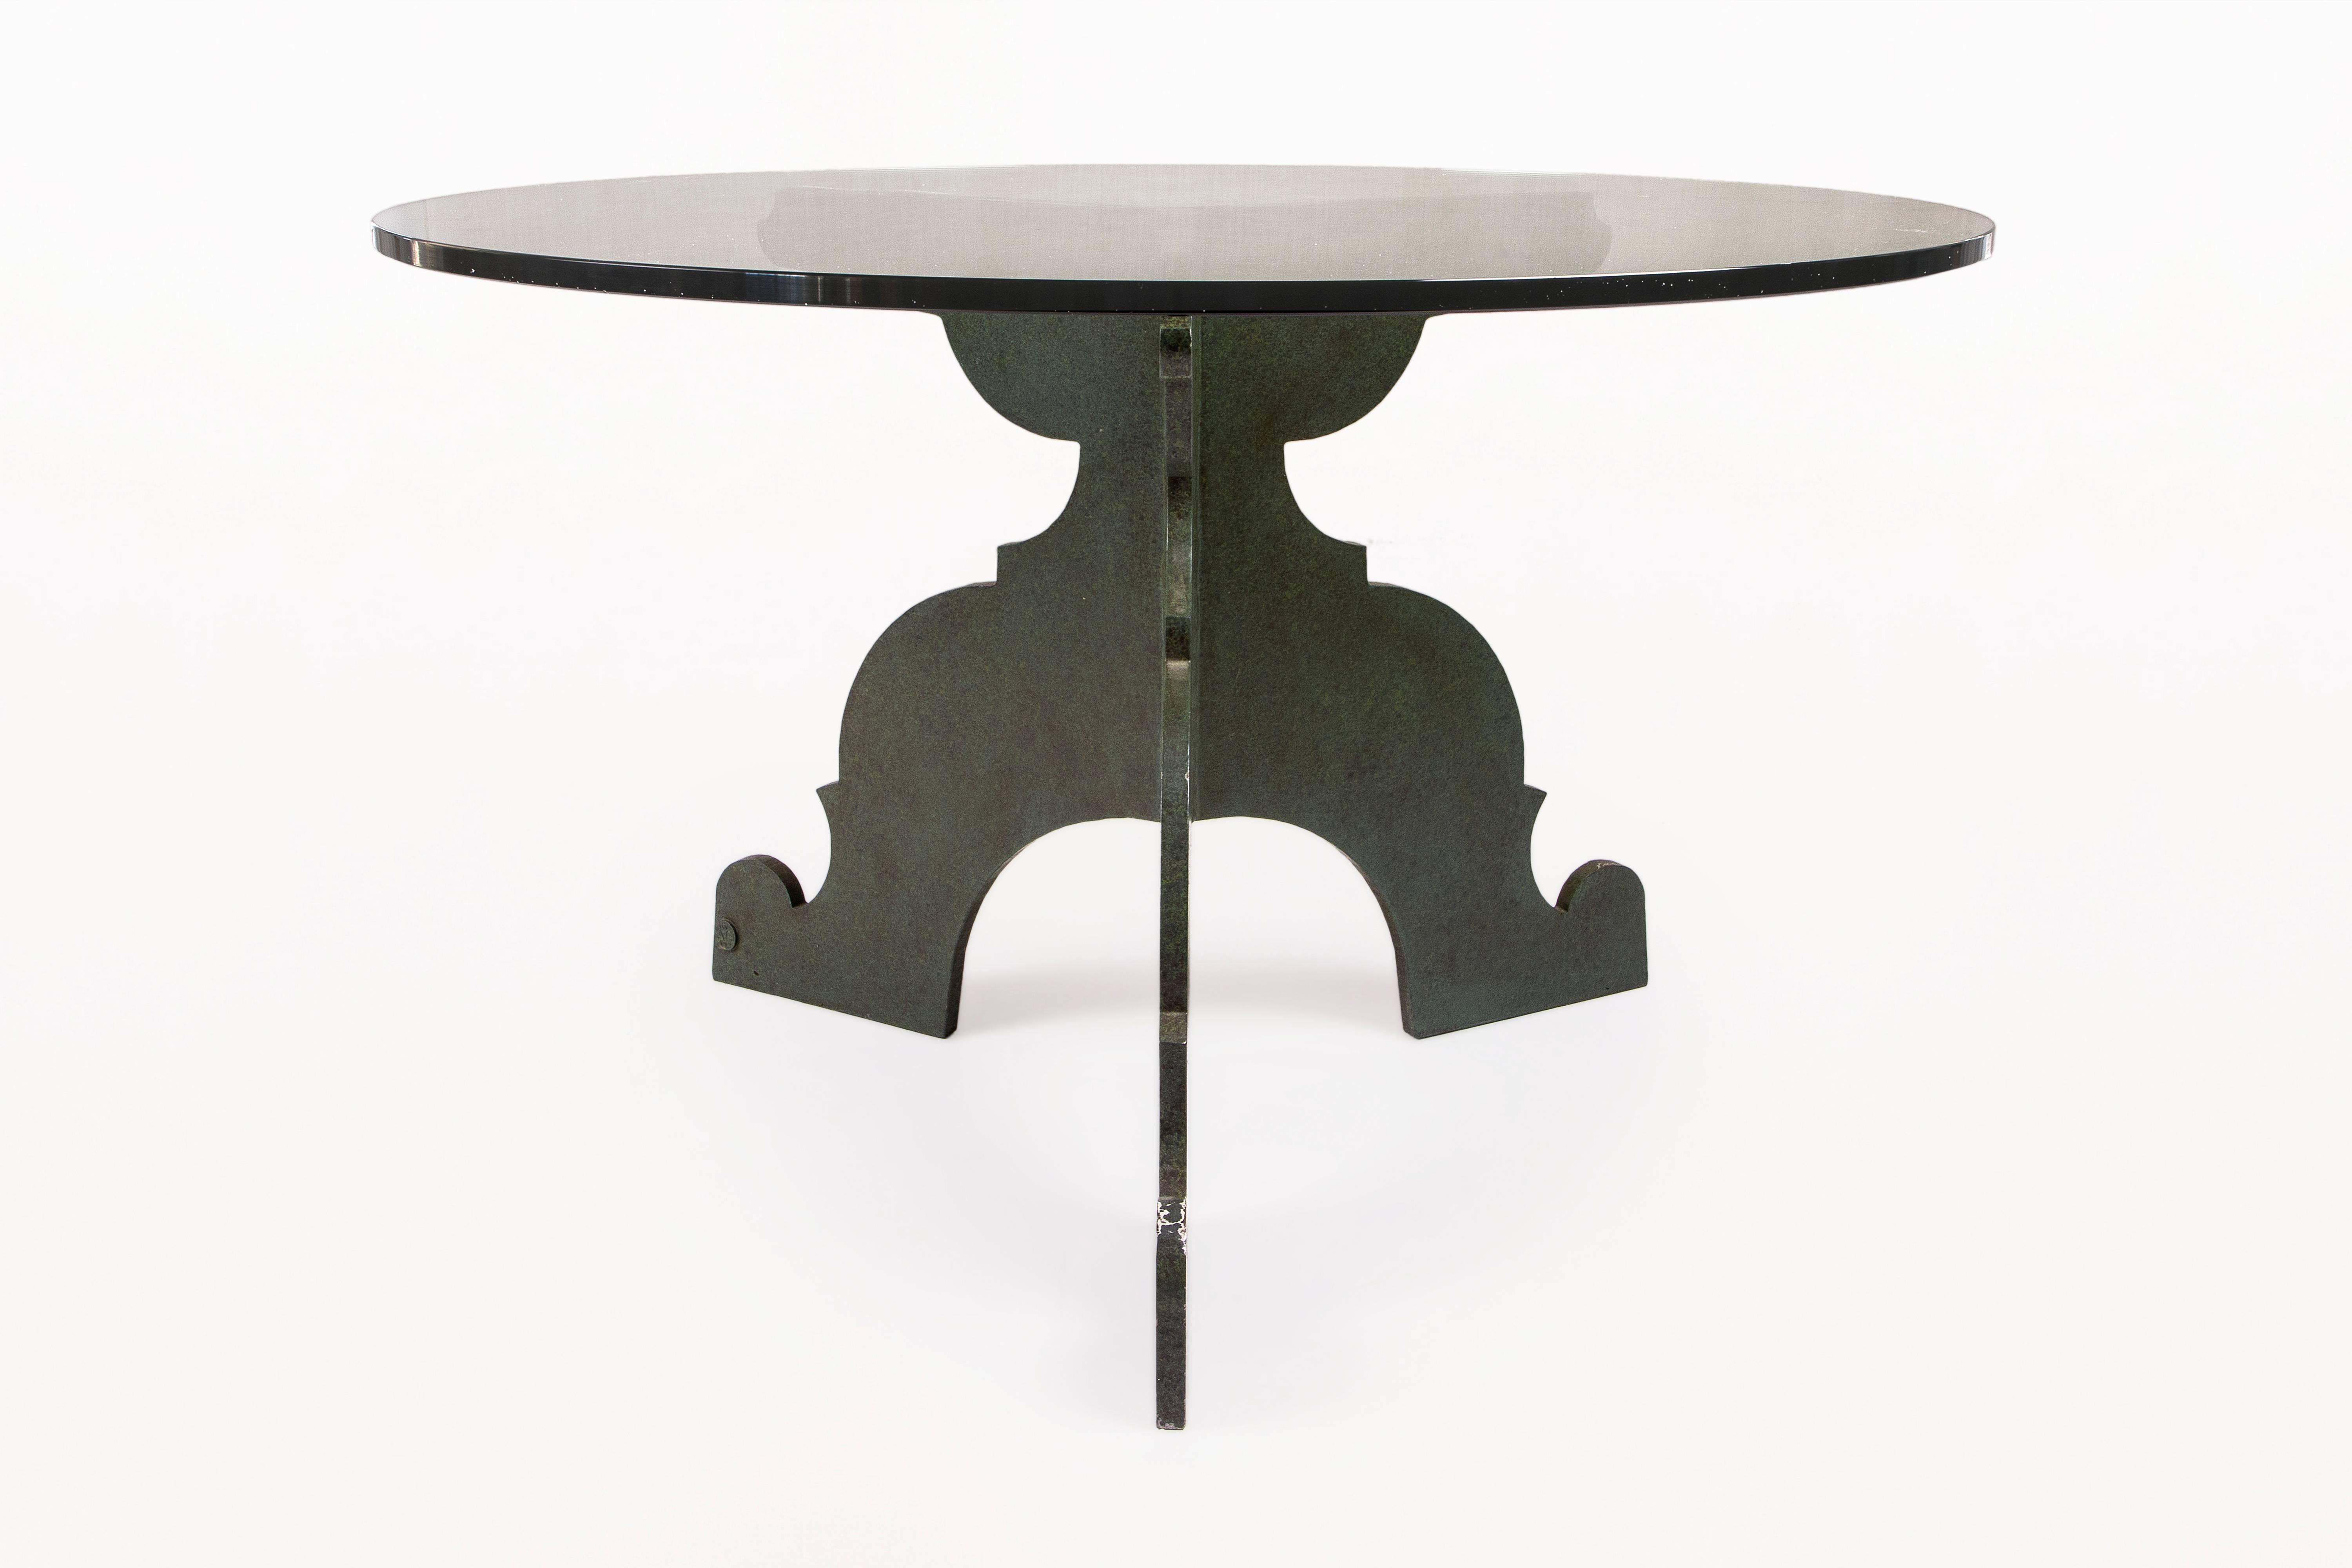 Valenti dining table
iron base and glass top
antique bronze finish
signed with Valenti stamp,
circa 1970s, Barcelona, Spain.
Very good vintage condition.